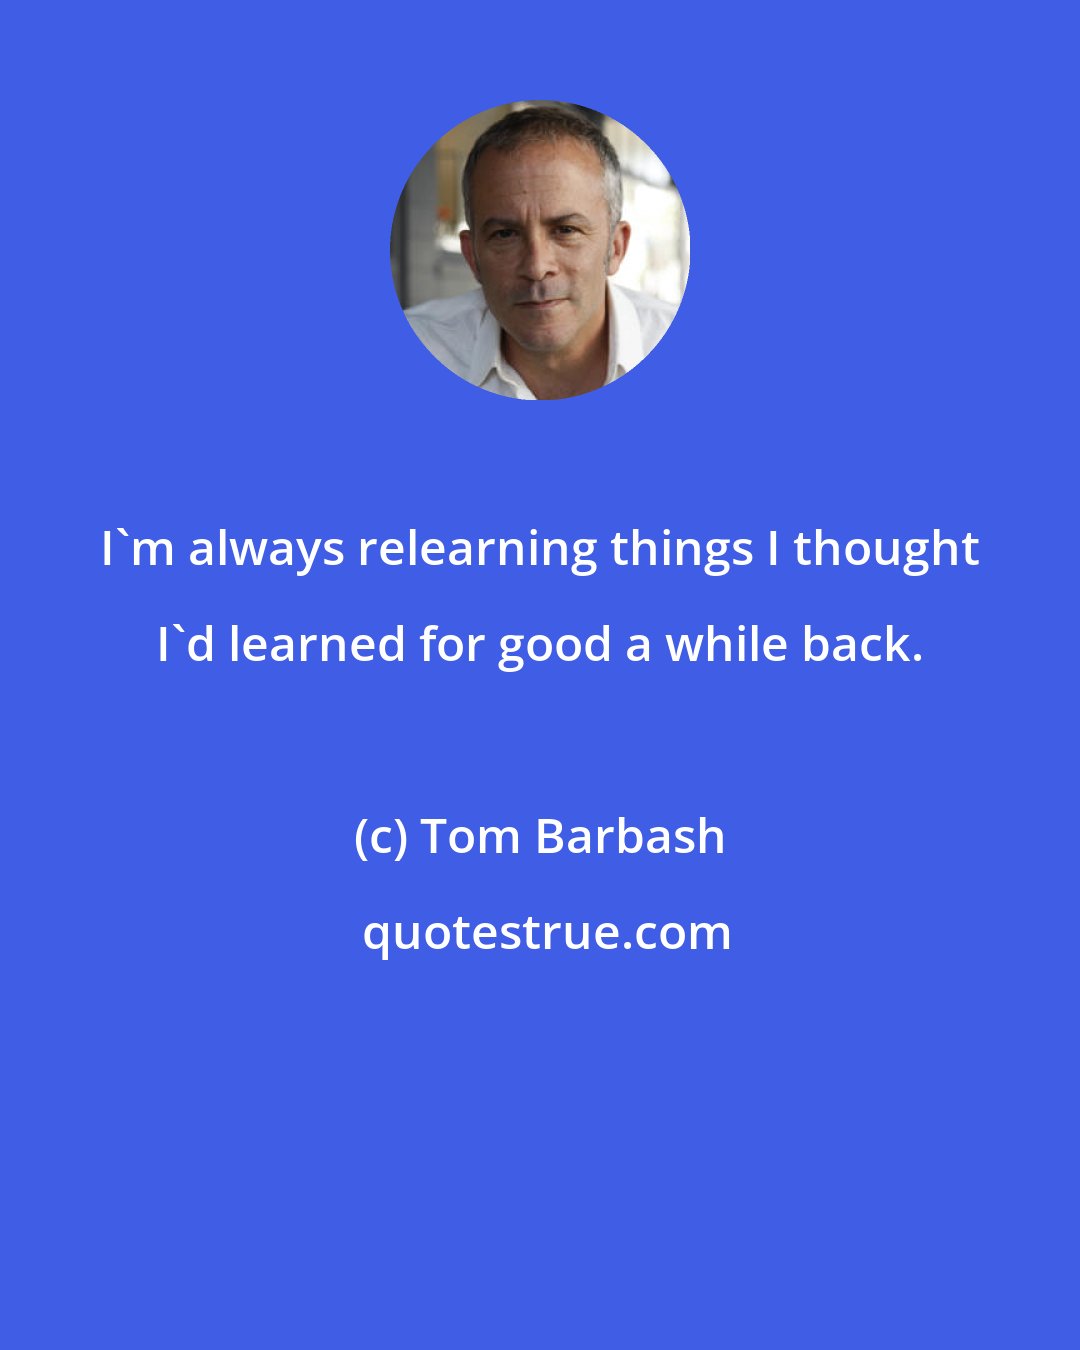 Tom Barbash: I'm always relearning things I thought I'd learned for good a while back.